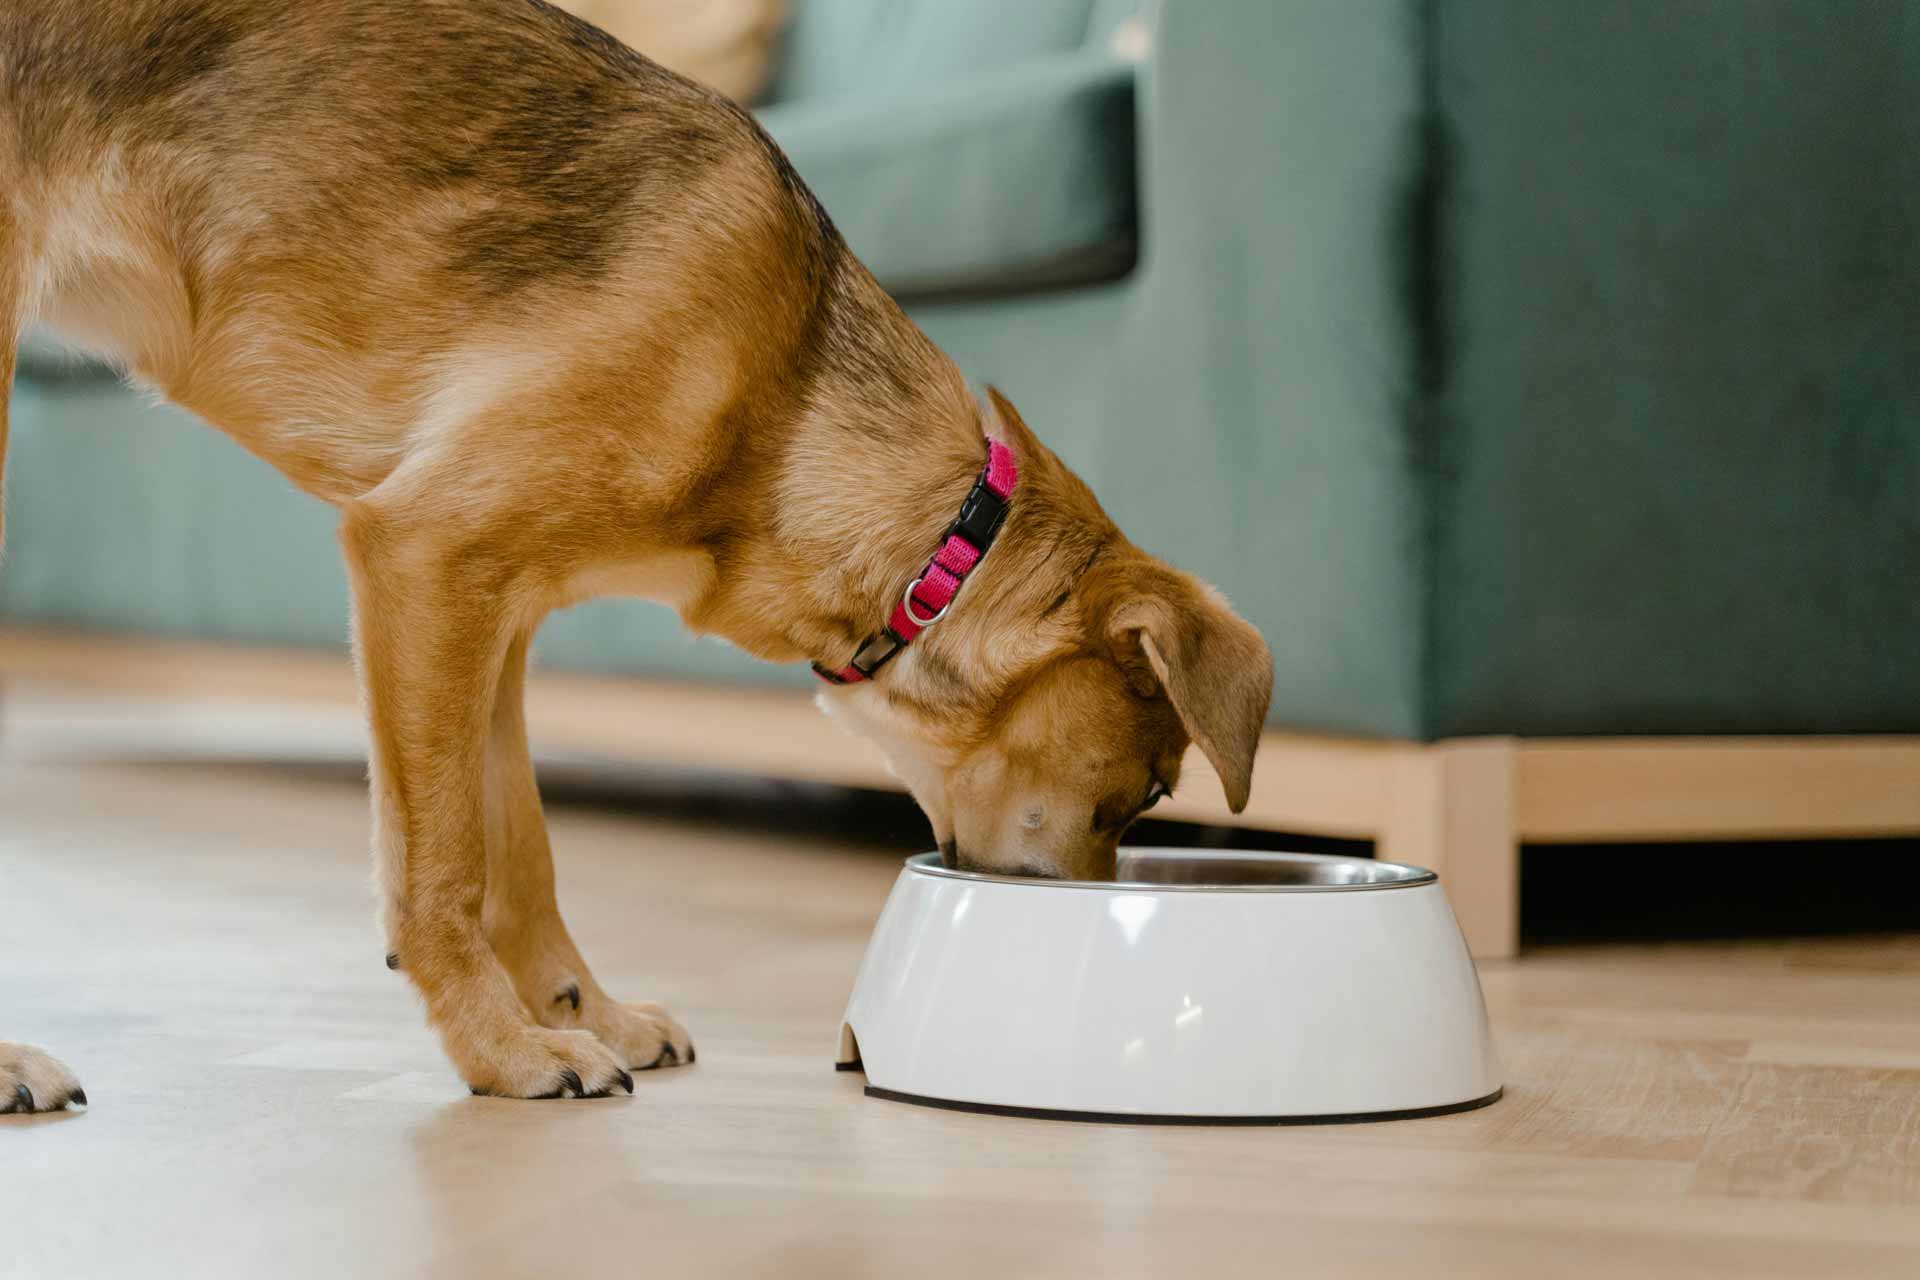 Fermented foods can have many health benefits and add a tasty treat to your pet's diet